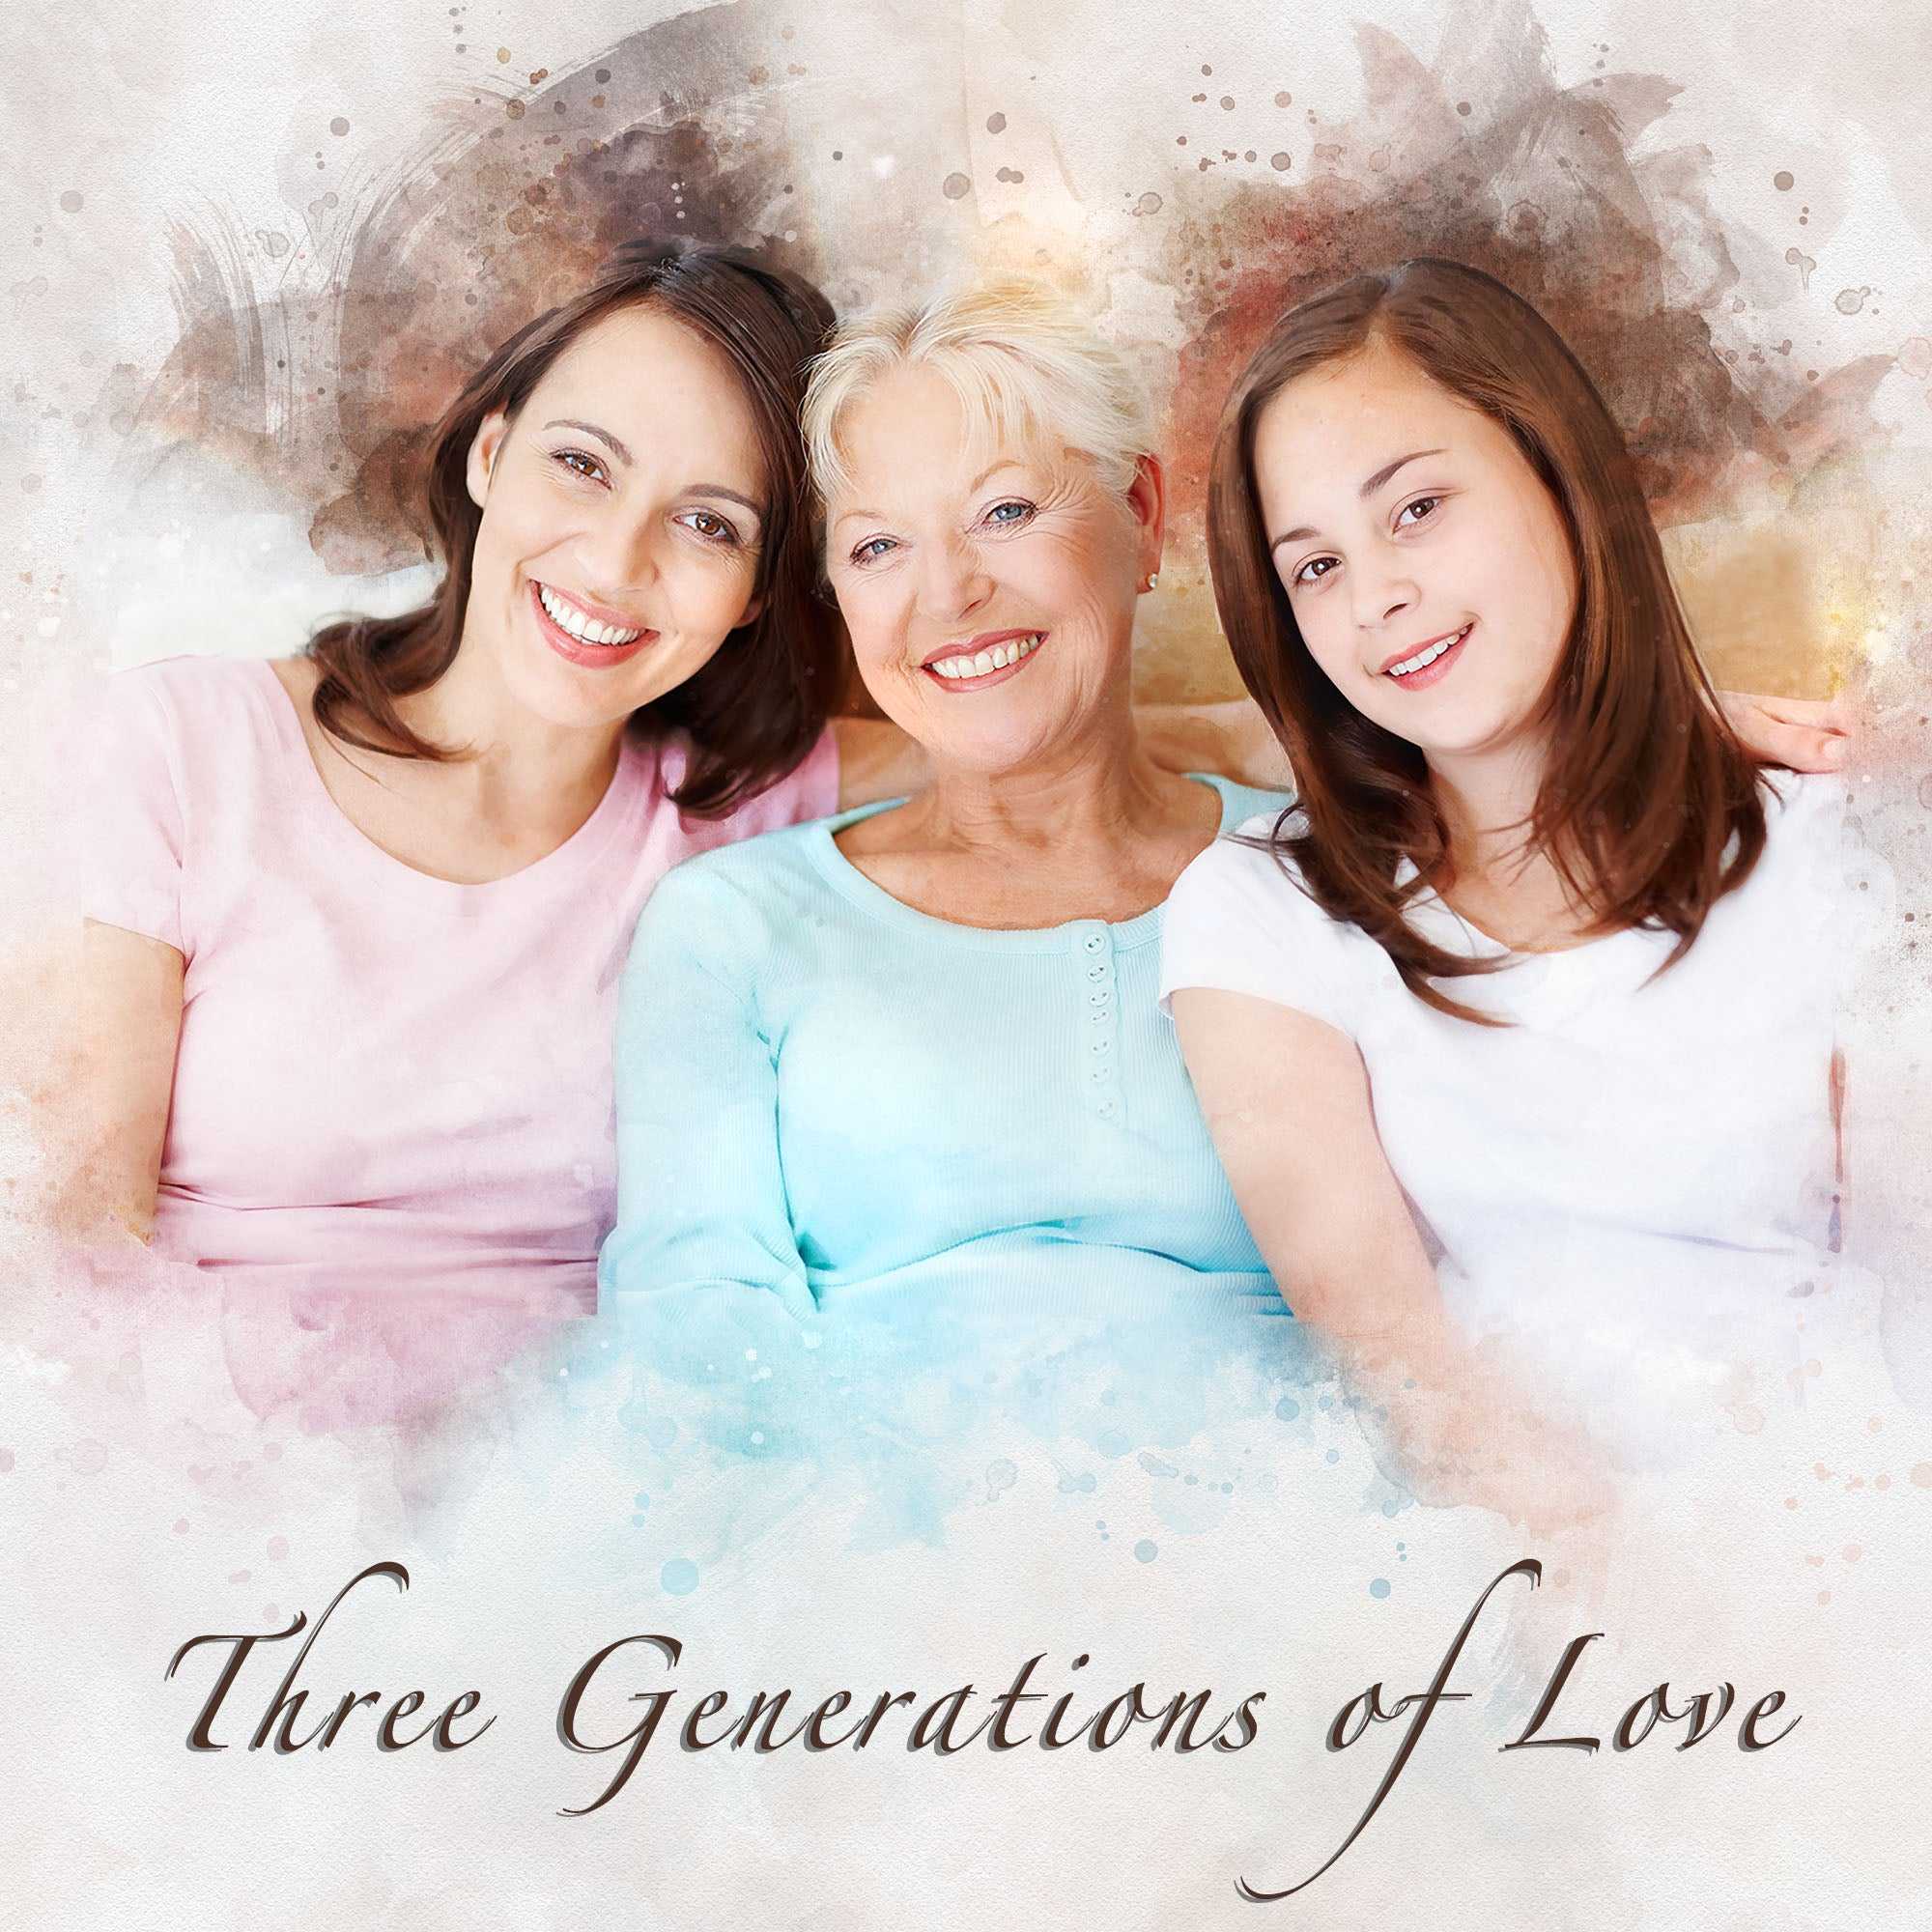 Painting of Loved Ones | Custom Portraits from Photo | Wall Art - FromPicToArt